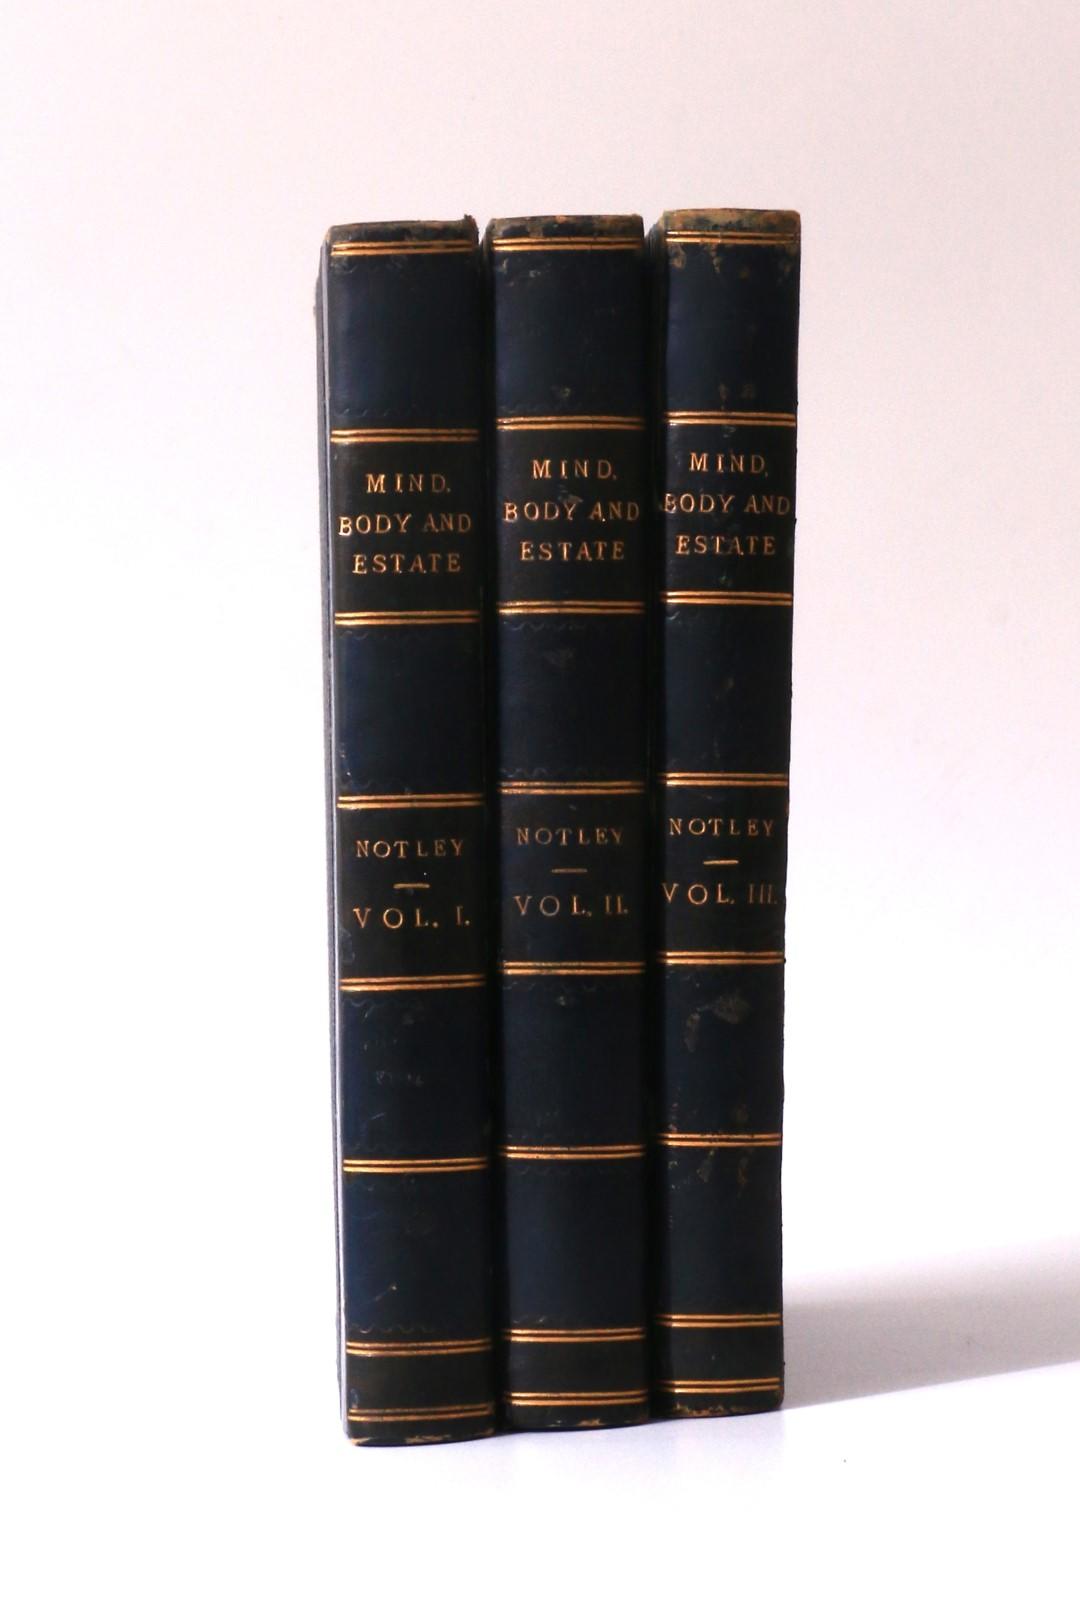 F.E.M. Notley - Mind, Body, And Estate. And Sea Maidens - Ward & Downey, 1885, First Edition.